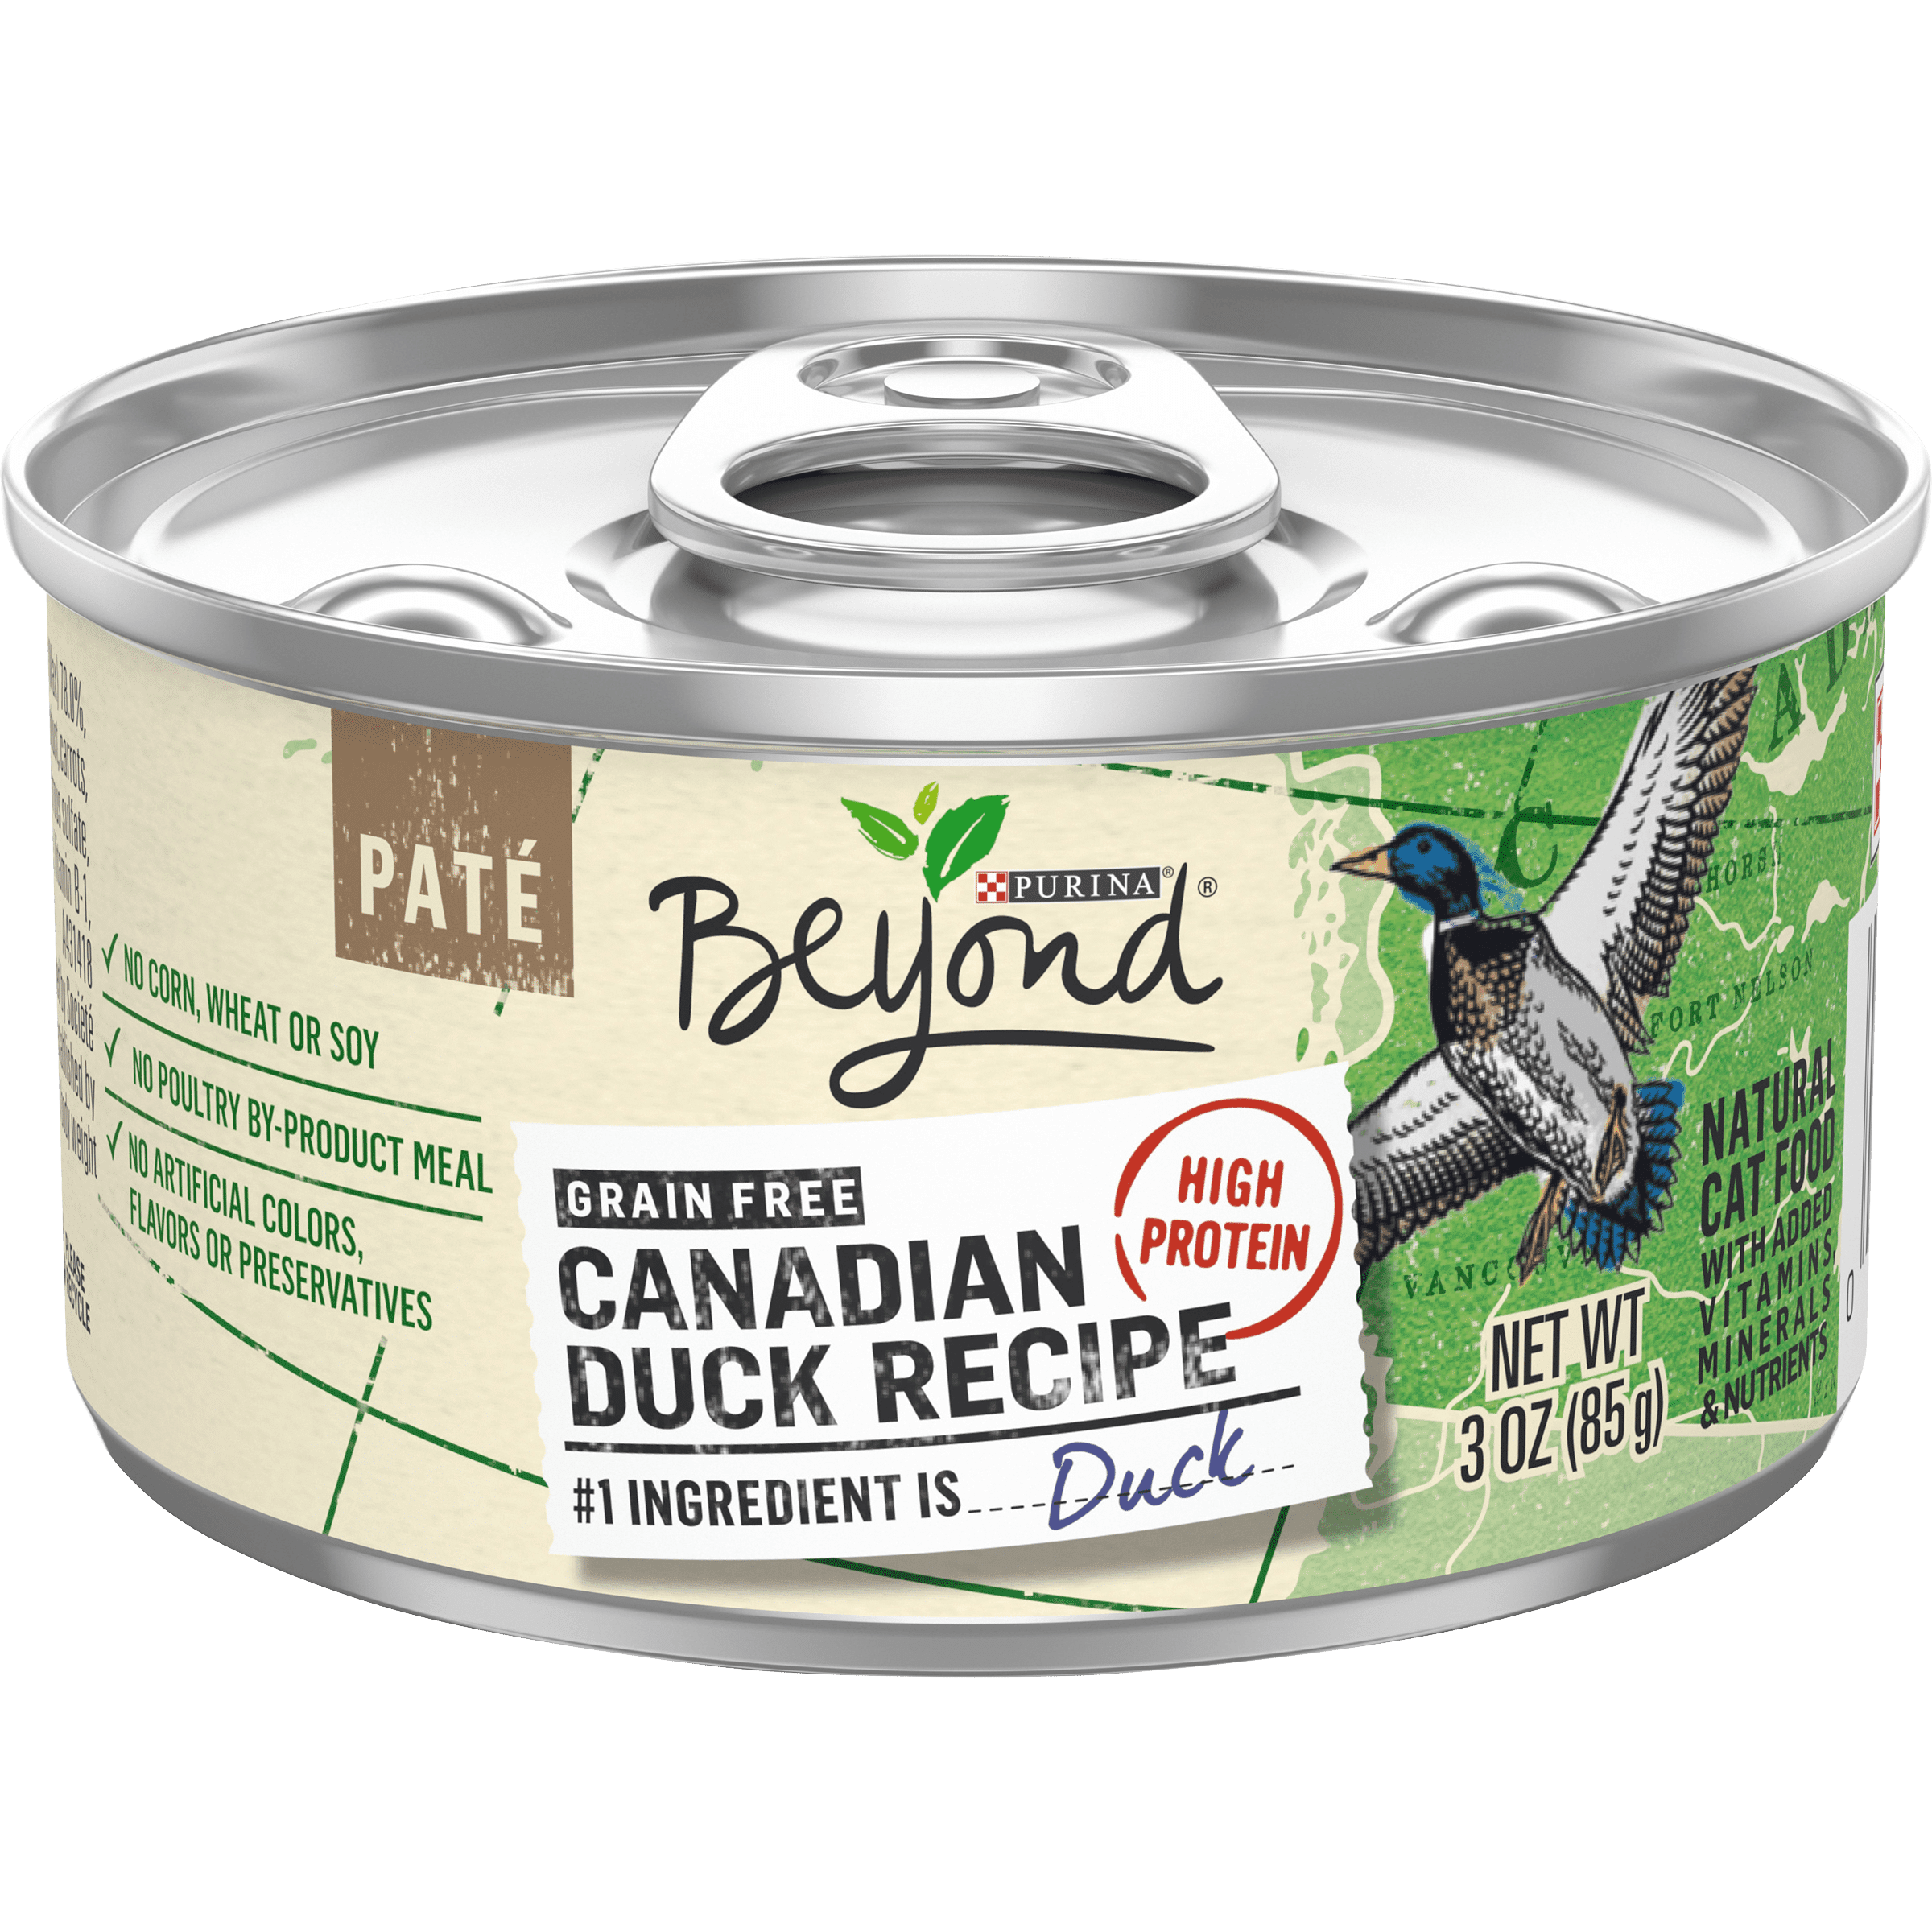 (12 Pack) Purina Beyond Grain Free, Natural, High Protein Pate Wet Cat